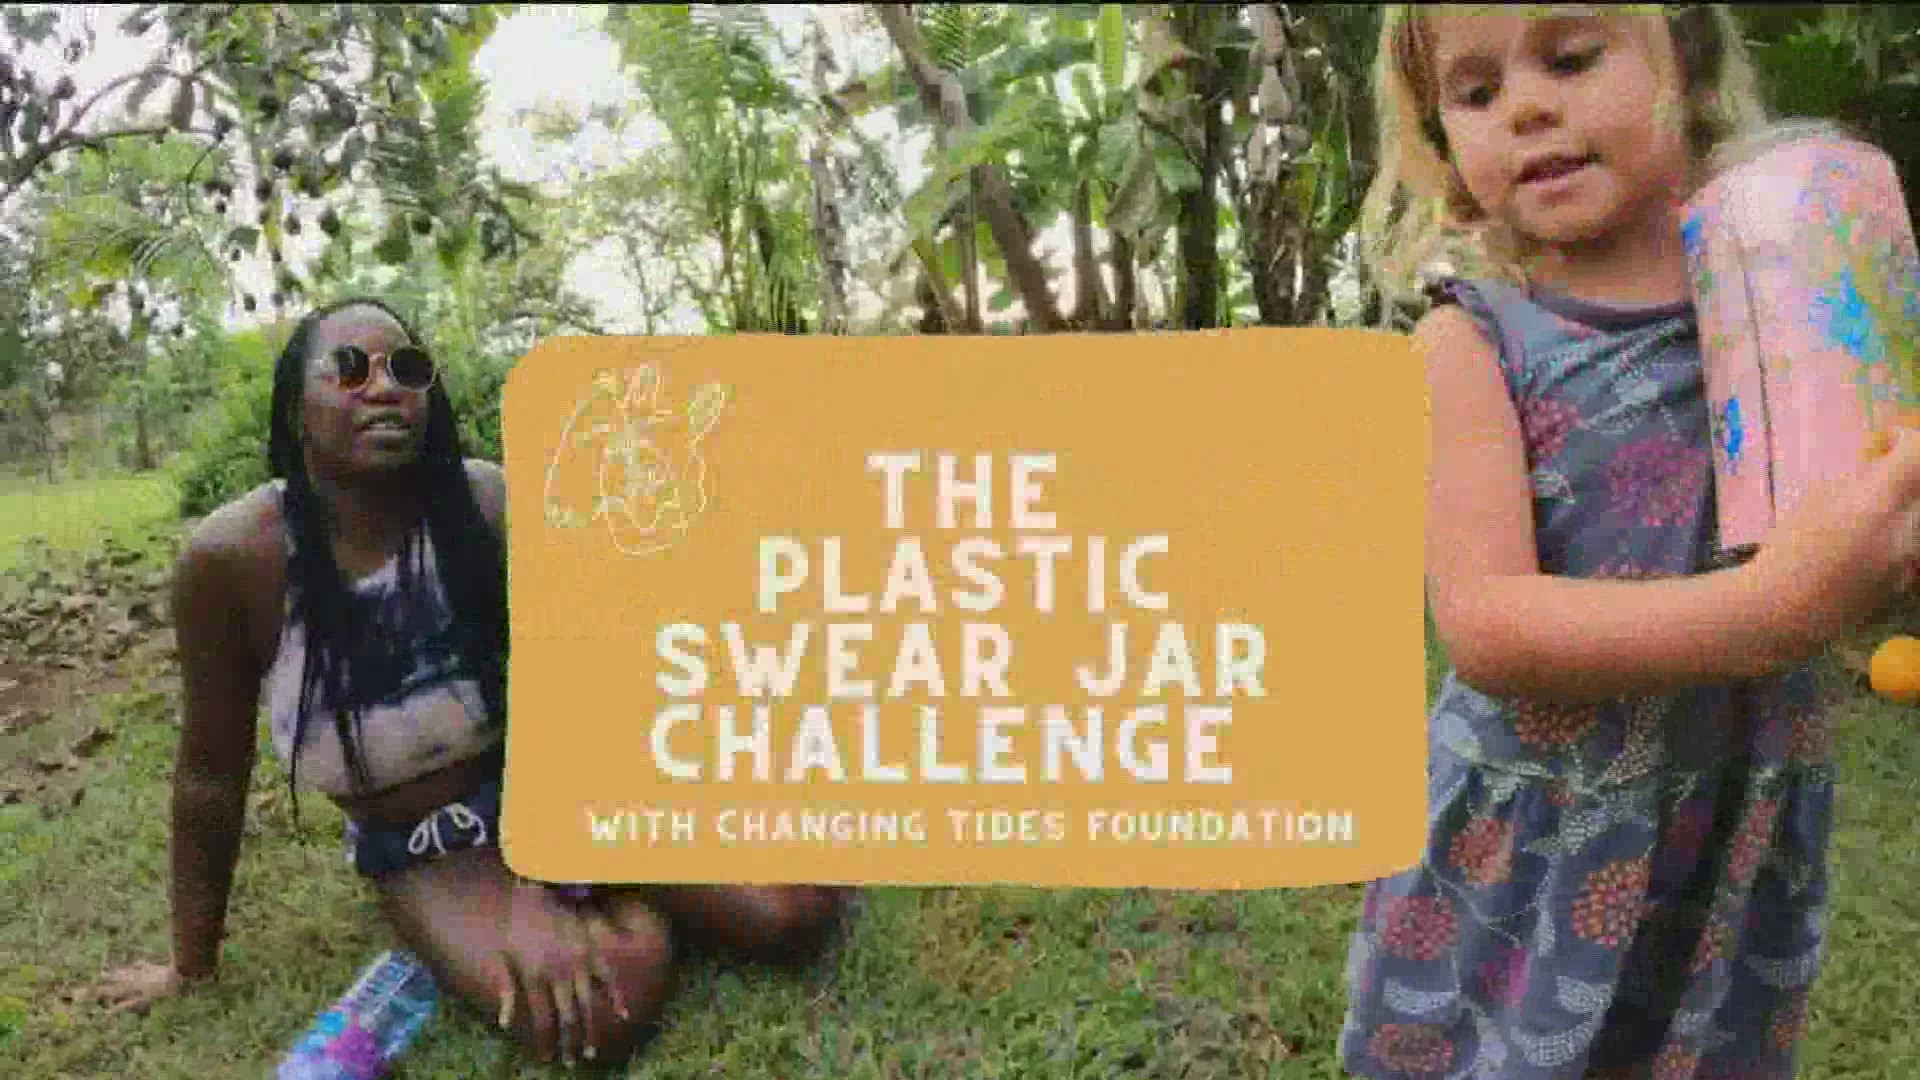 It's from the Changing Tides Foundation.